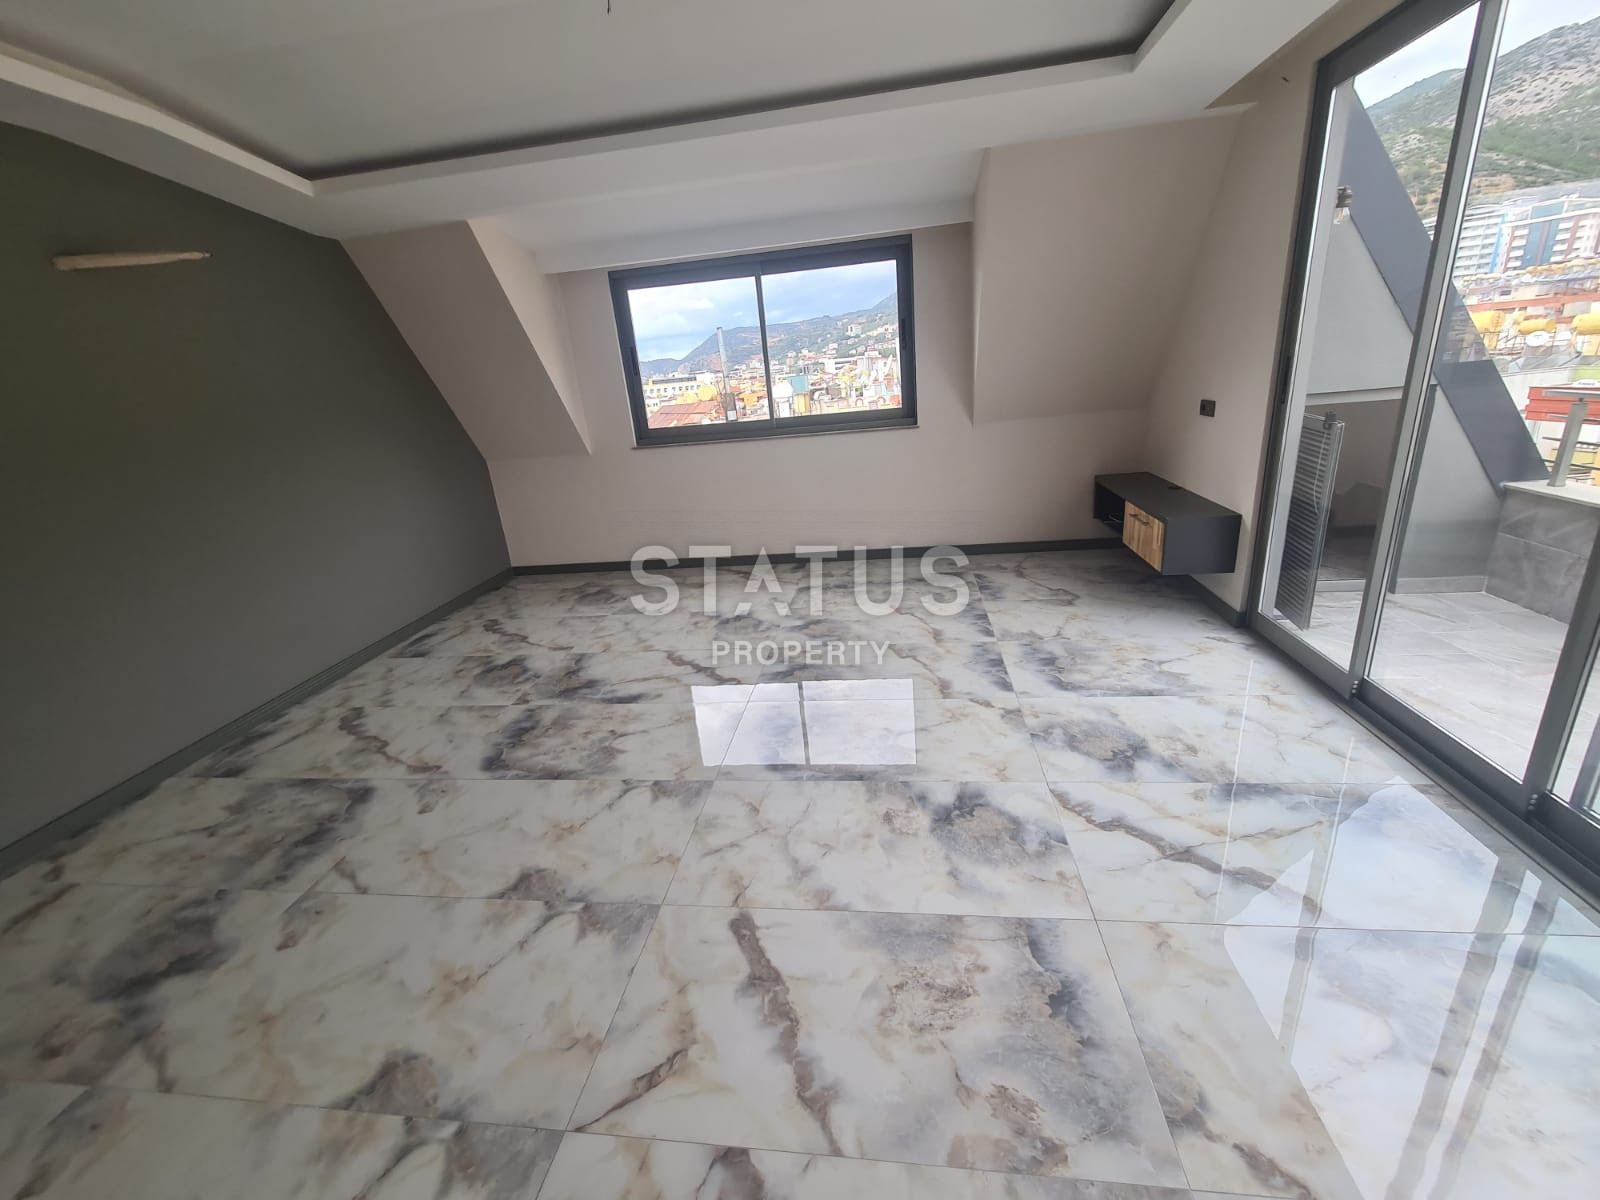 Duplex apartment 2+1 in the center of Alanya in a new house with a view of the mountains and the Alanya Castle, 120m2 фото 2